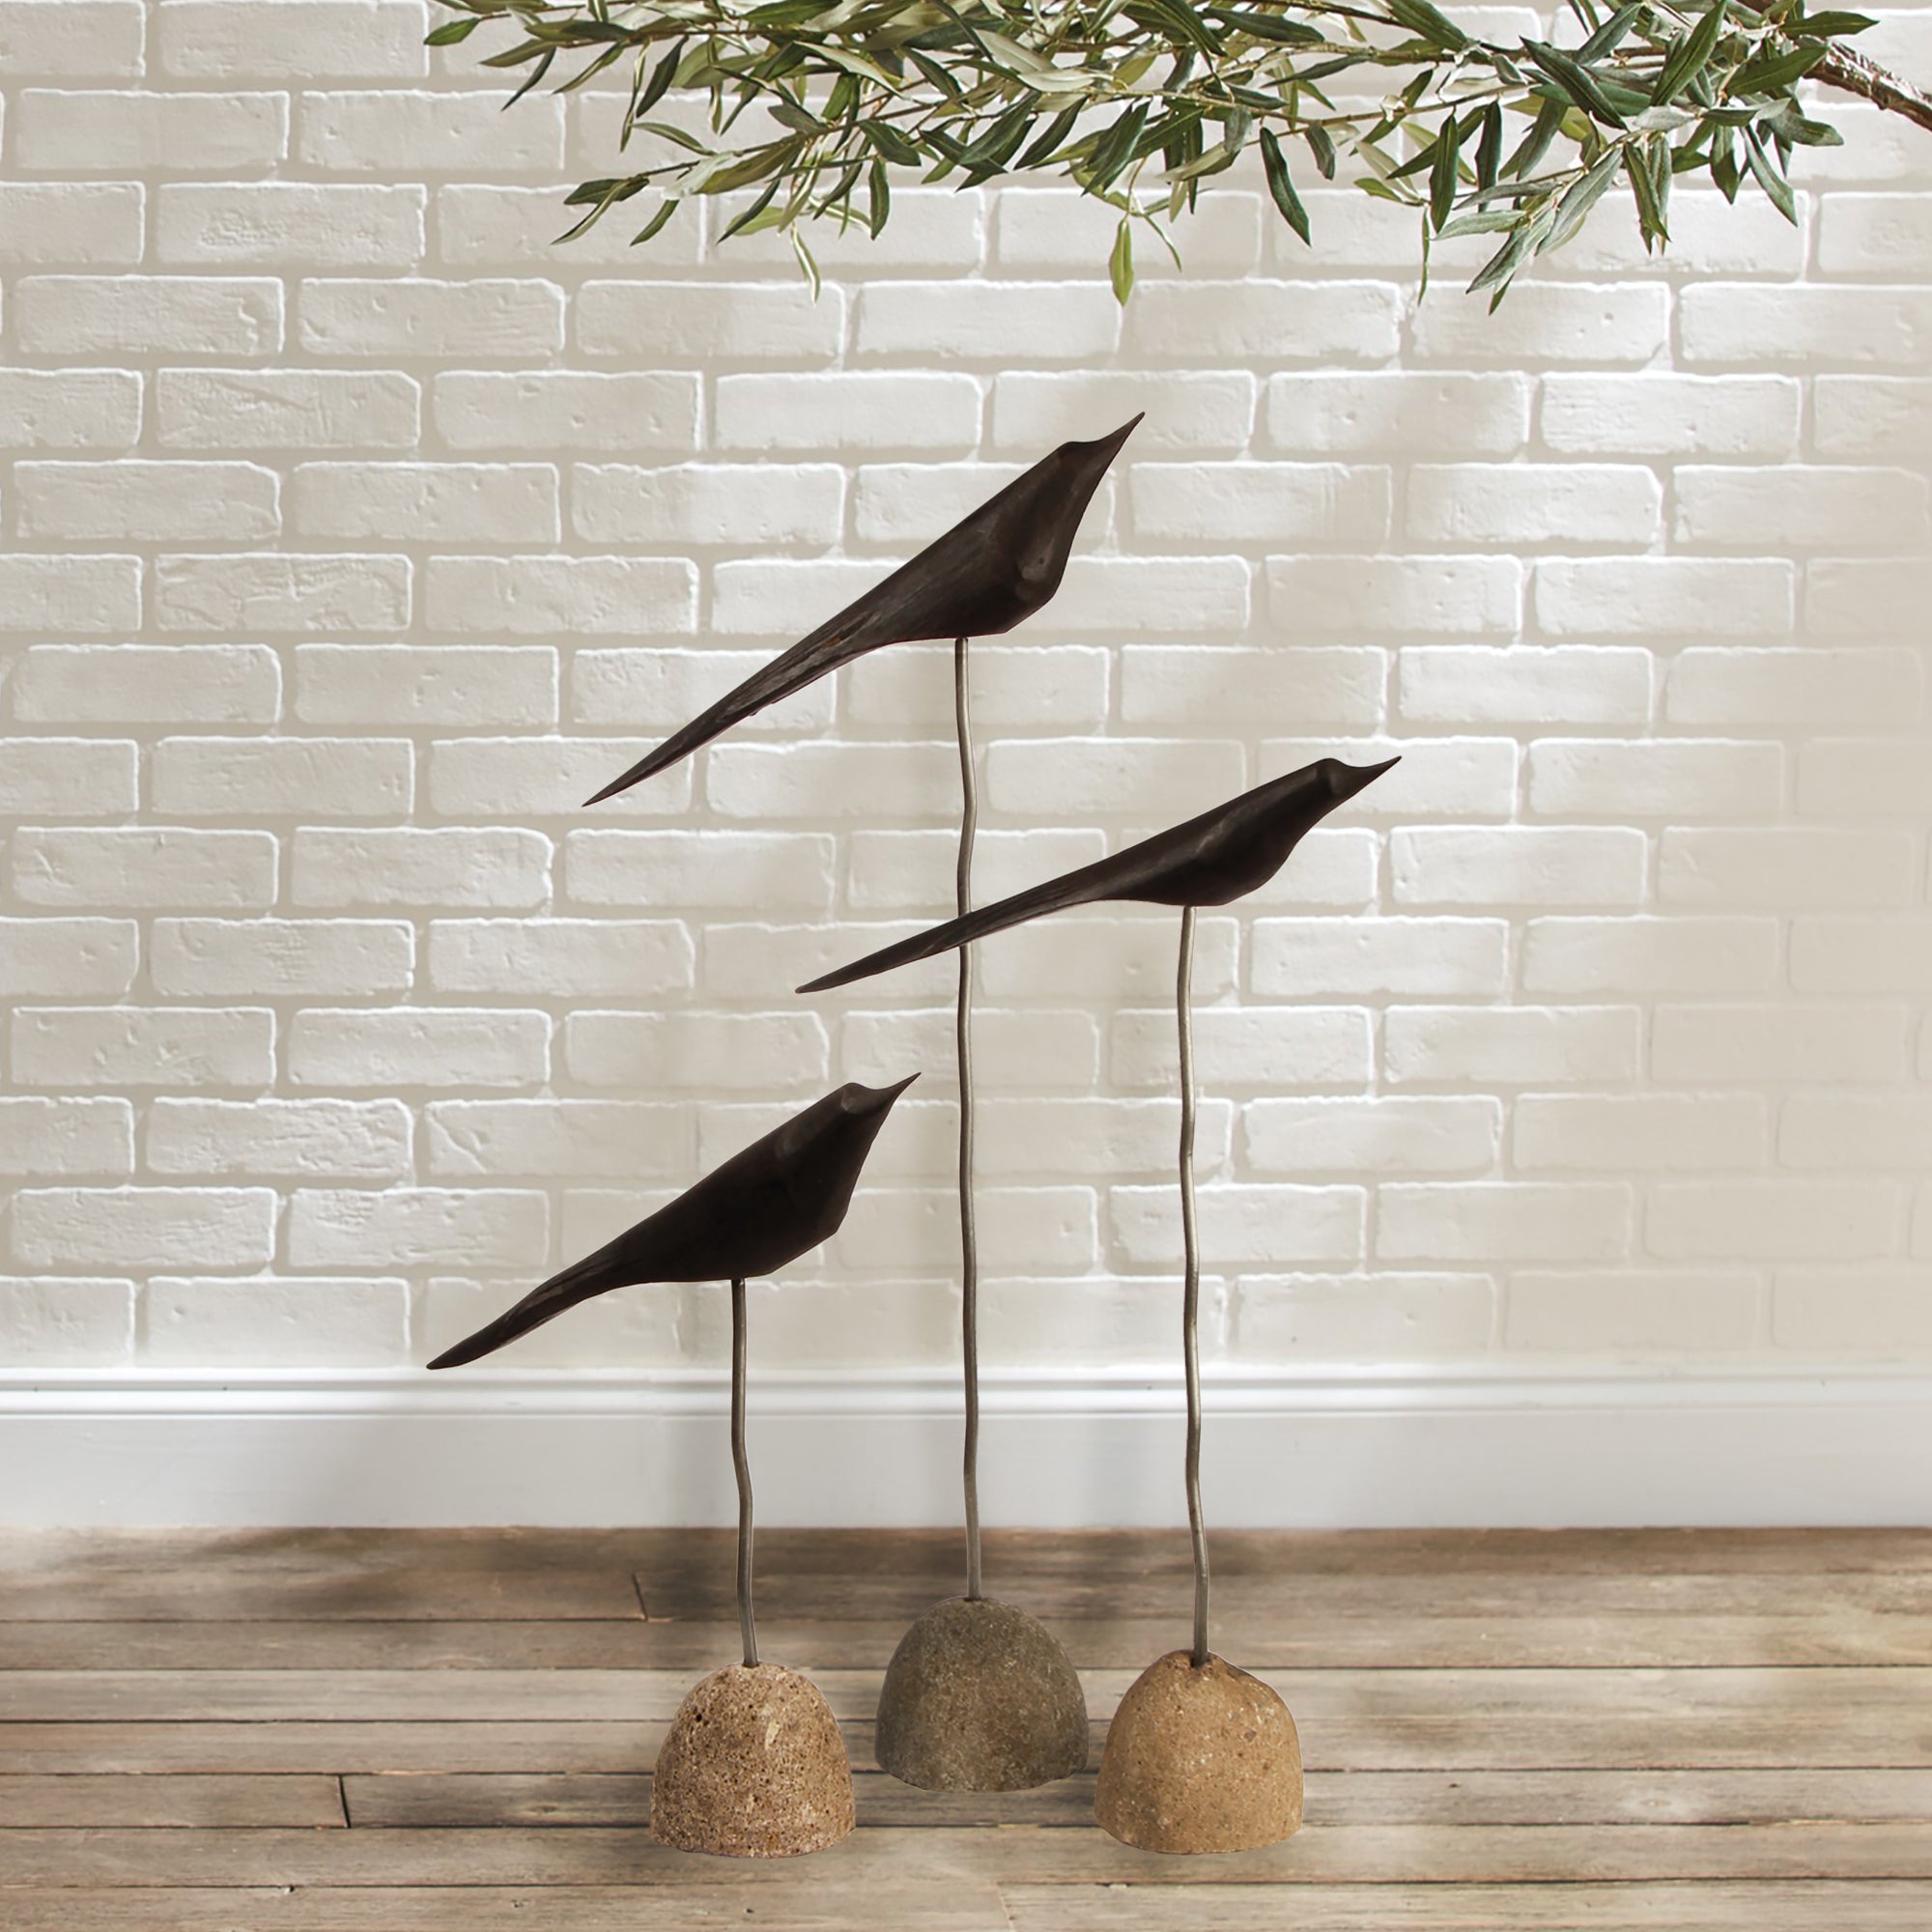 Handcrafted rustic artwork with modern black birds. Amethyst Home provides interior design, new construction, custom furniture, and area rugs in the Calabasas metro area.